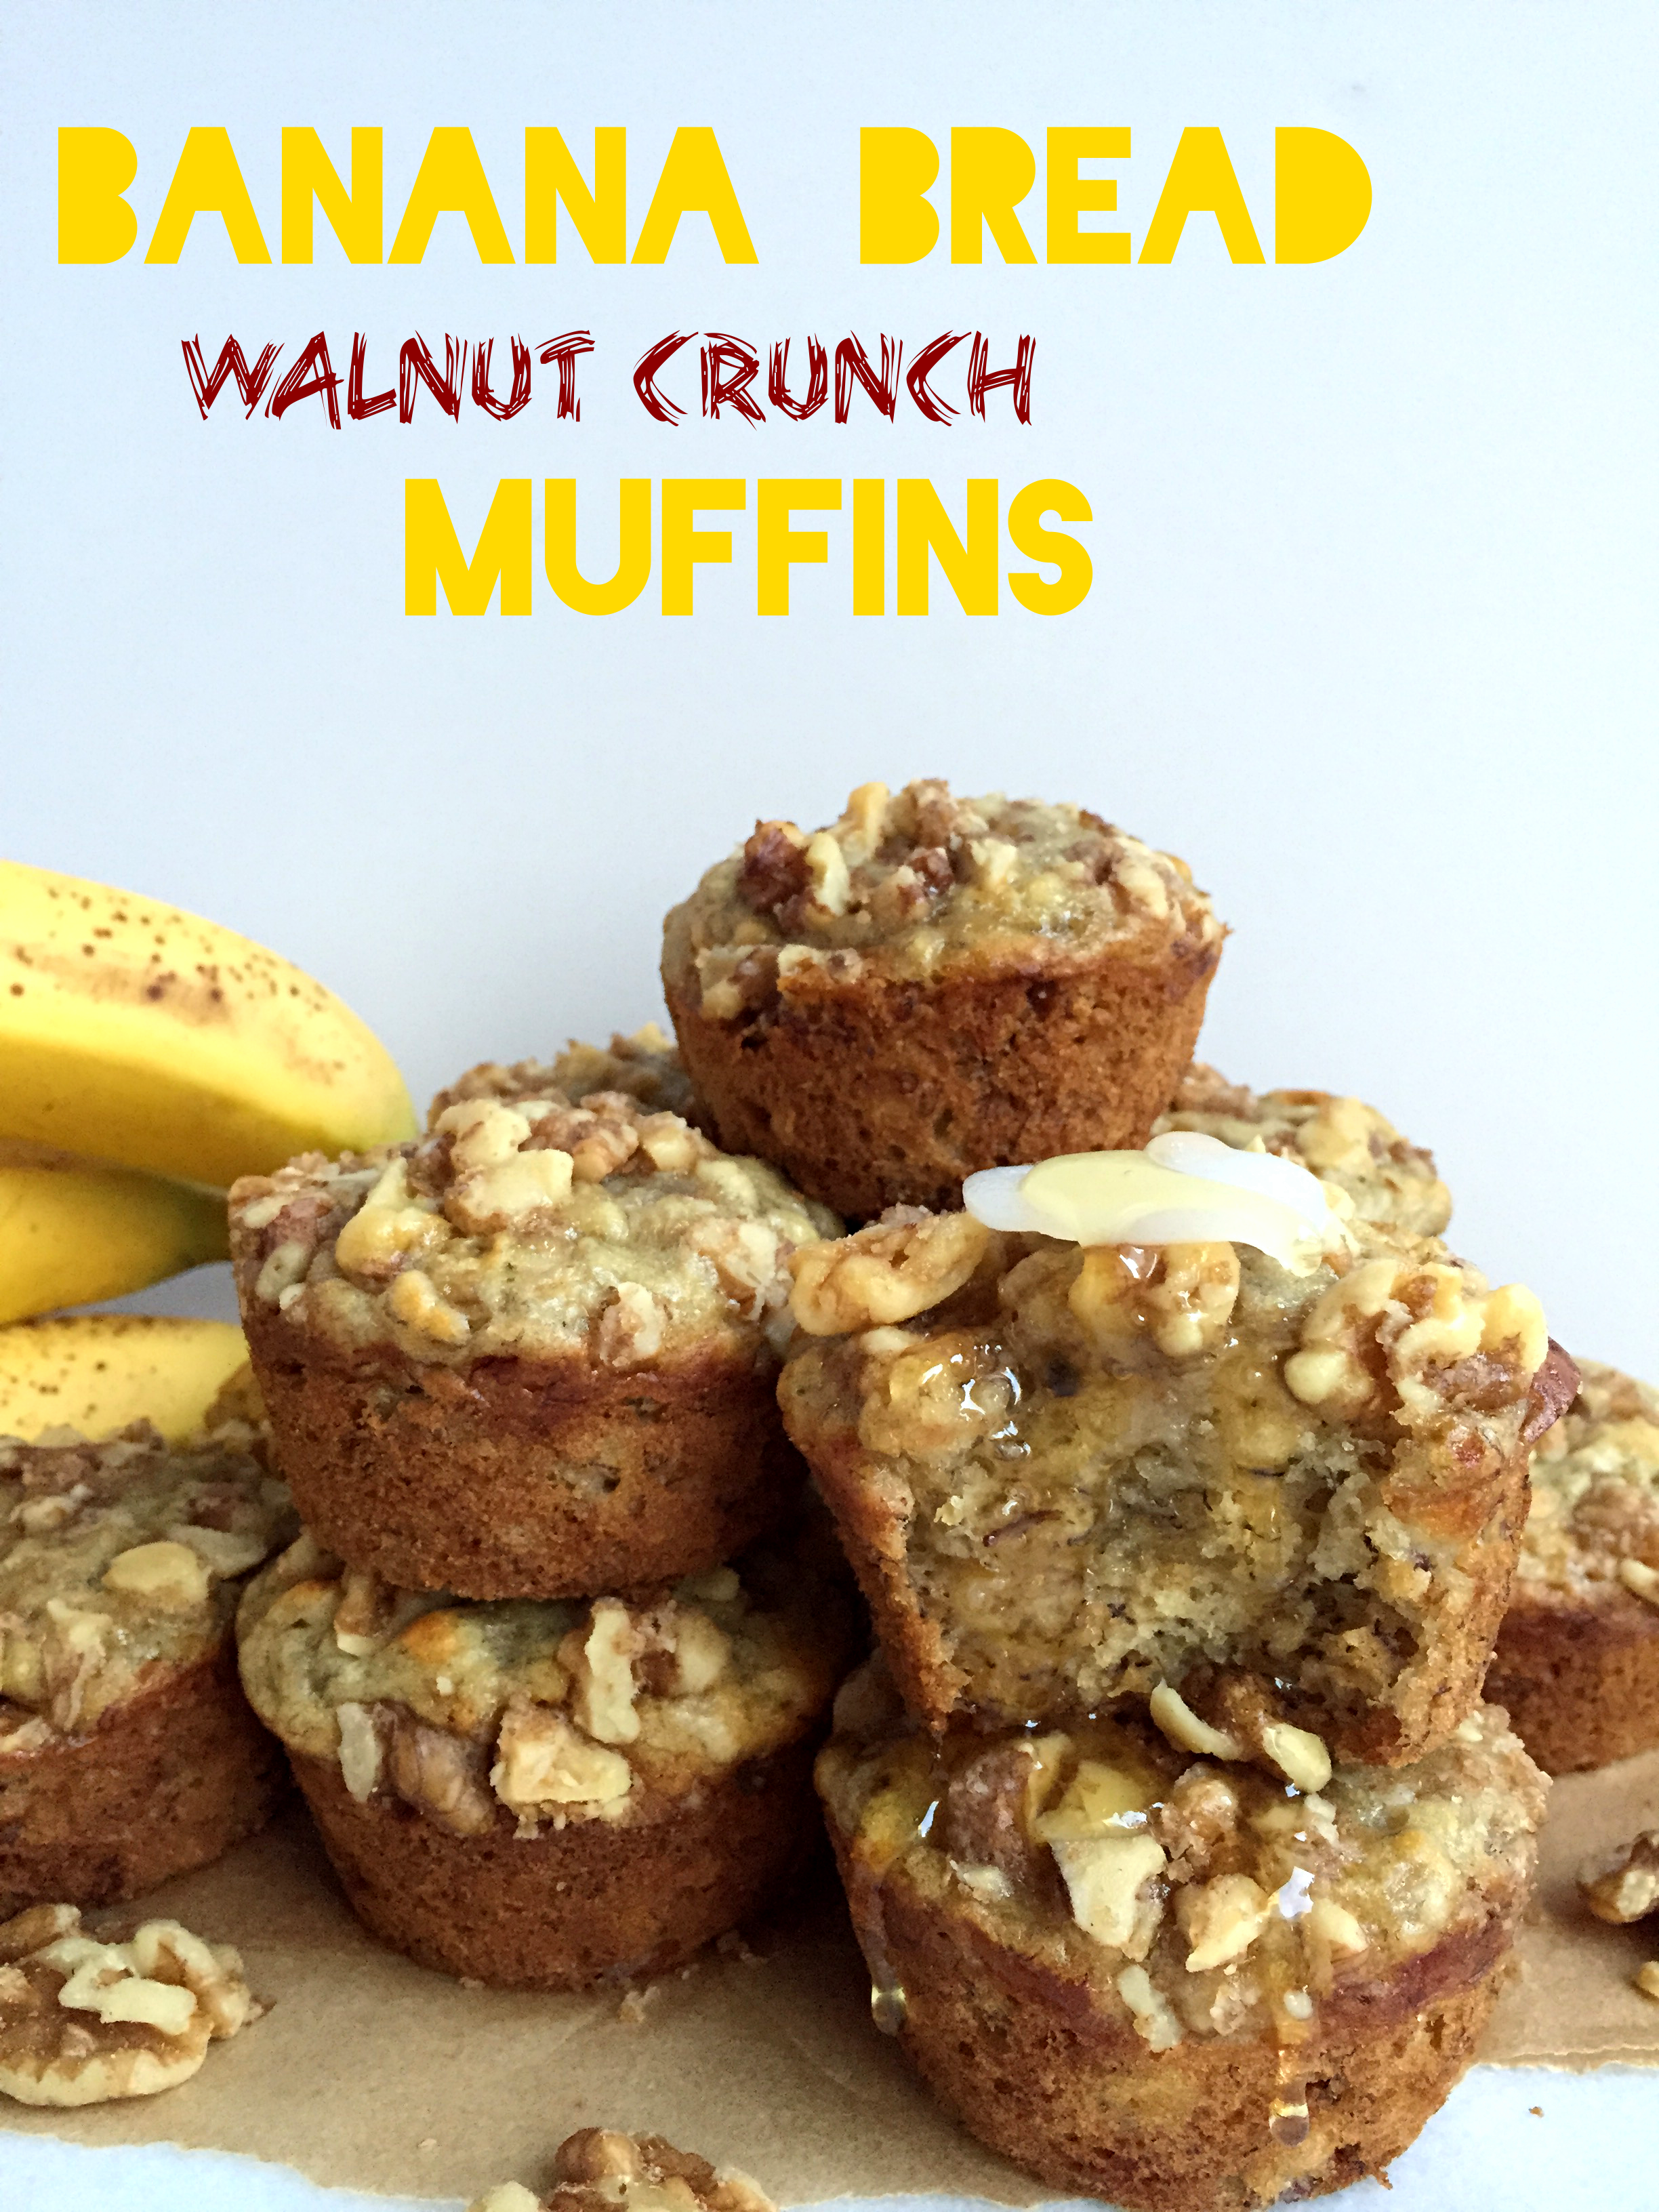 INCREDIBLE Banana Bread Walnut Crunch Muffins! Super moist with the perfect crunch topping and completely dairy free! #dairyfree #recipe | Peach and the Cobbler